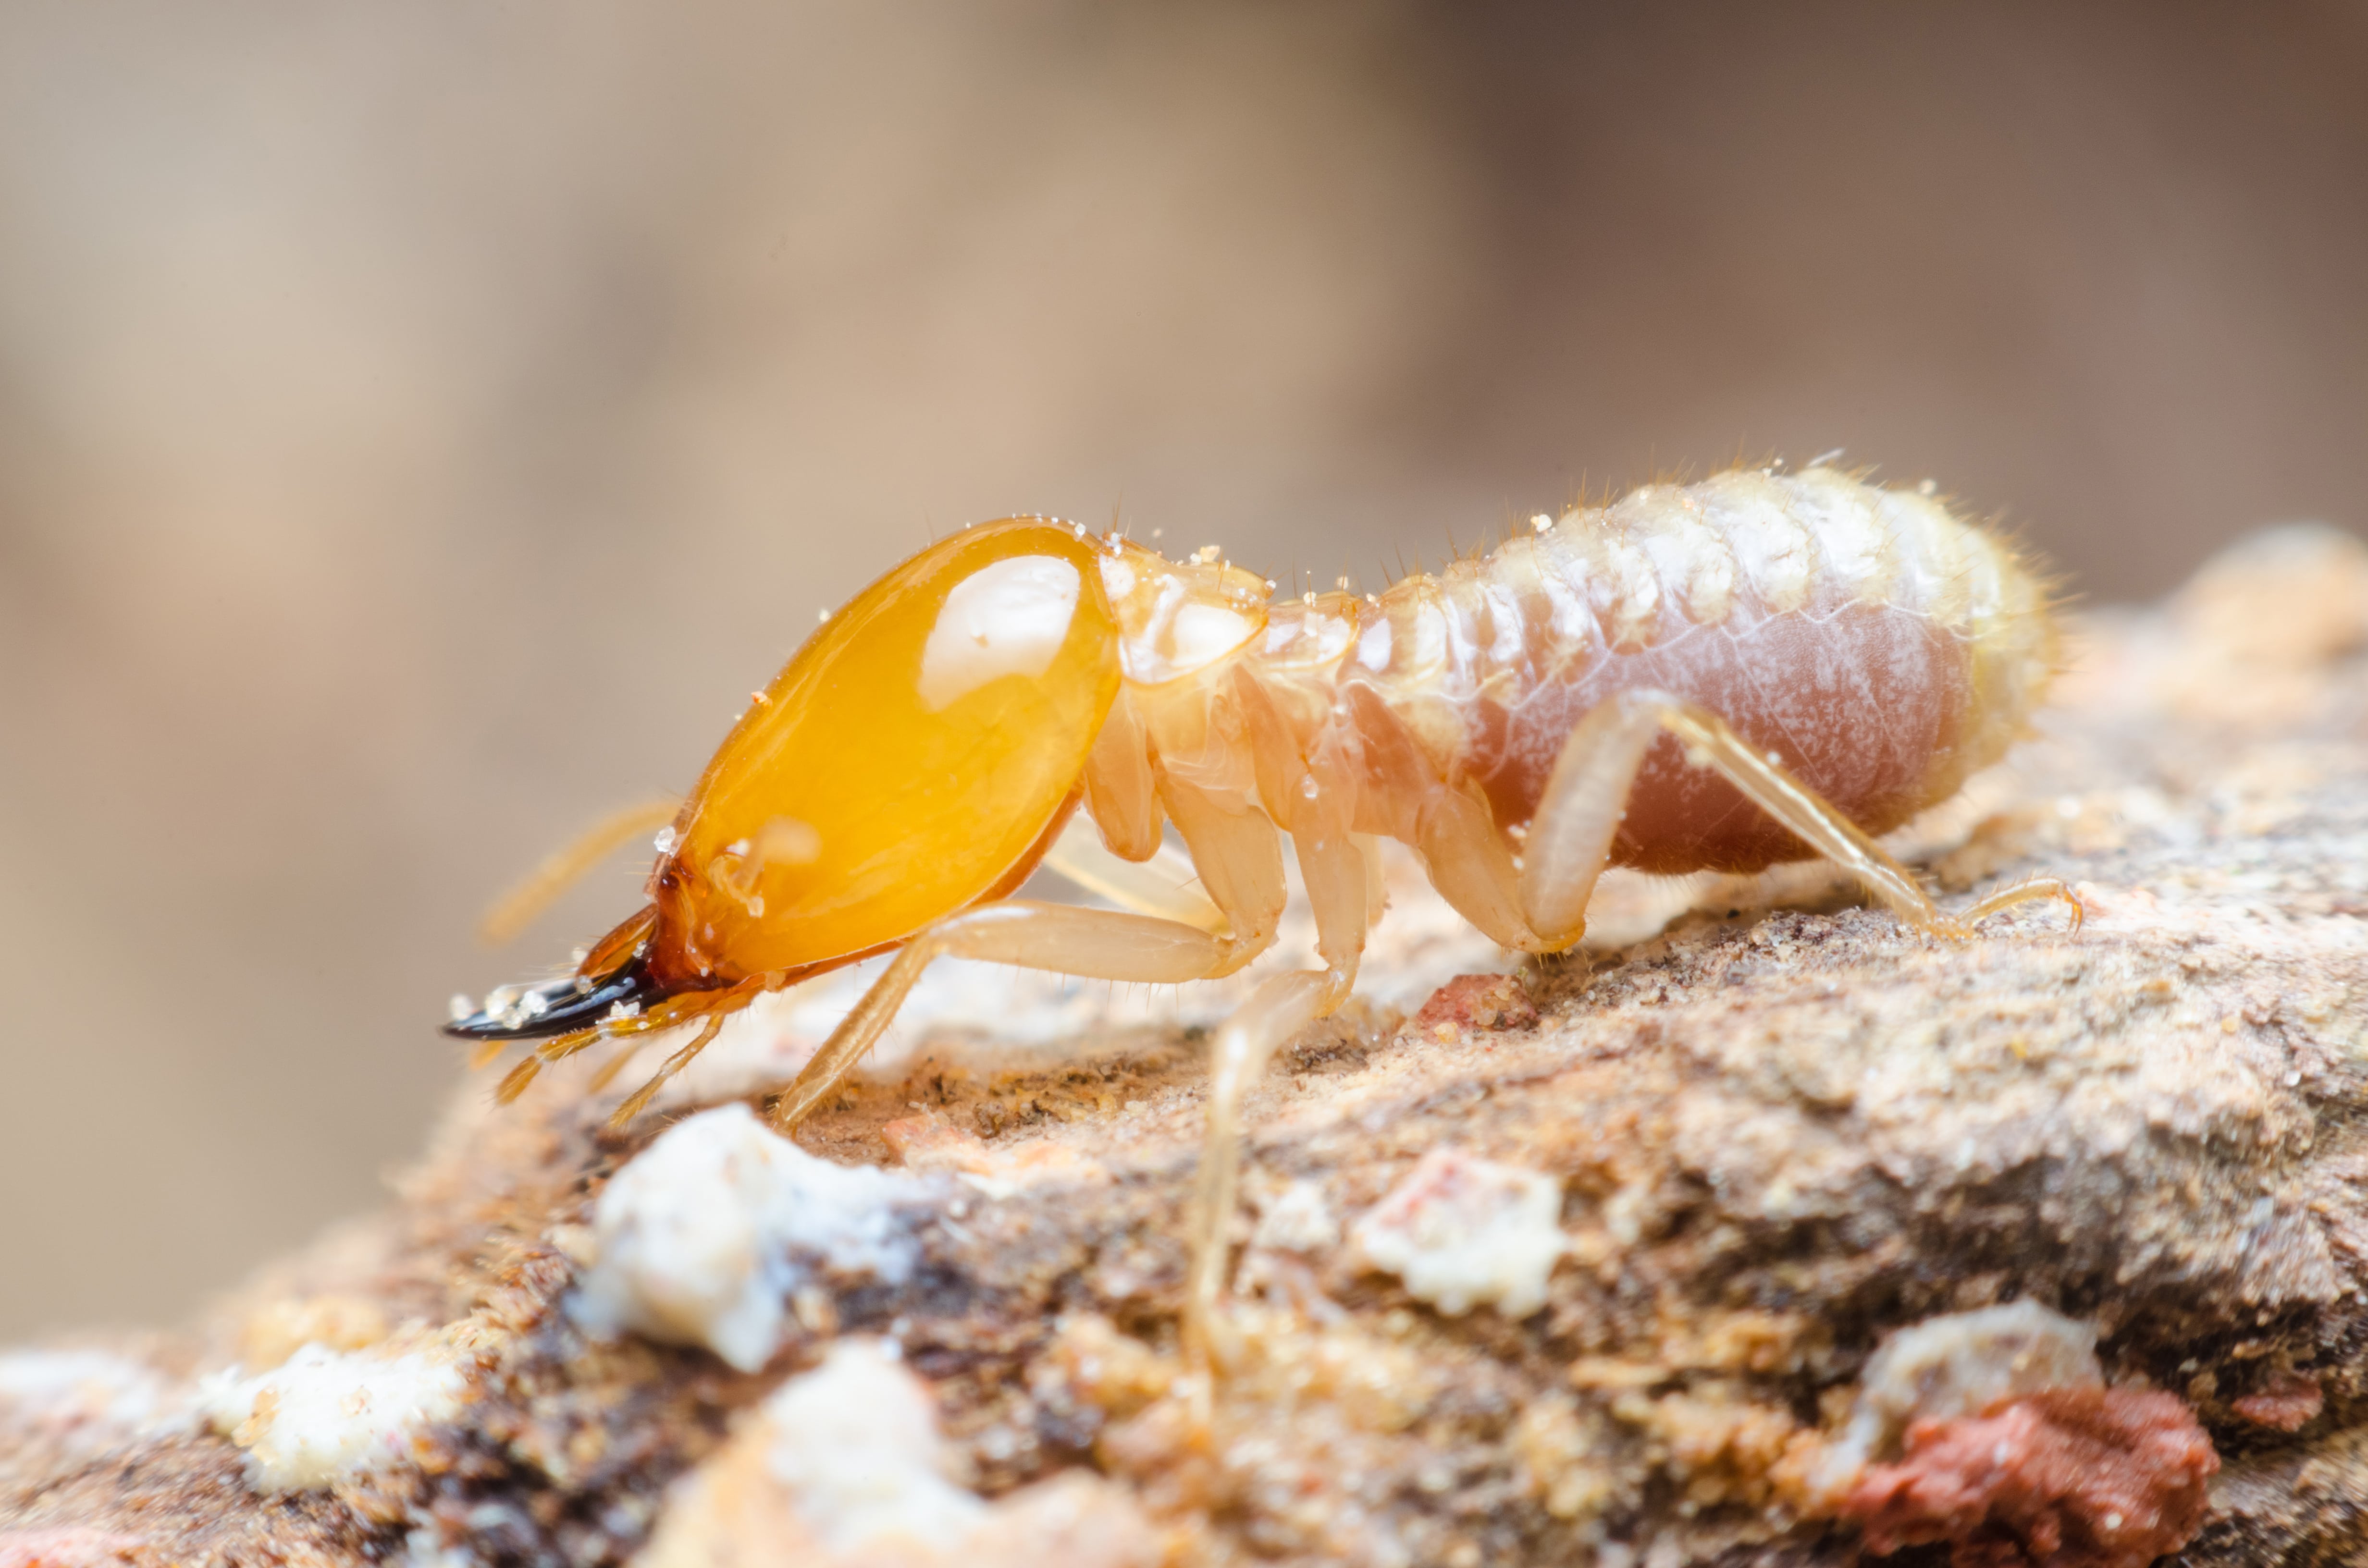 do termites have eyes